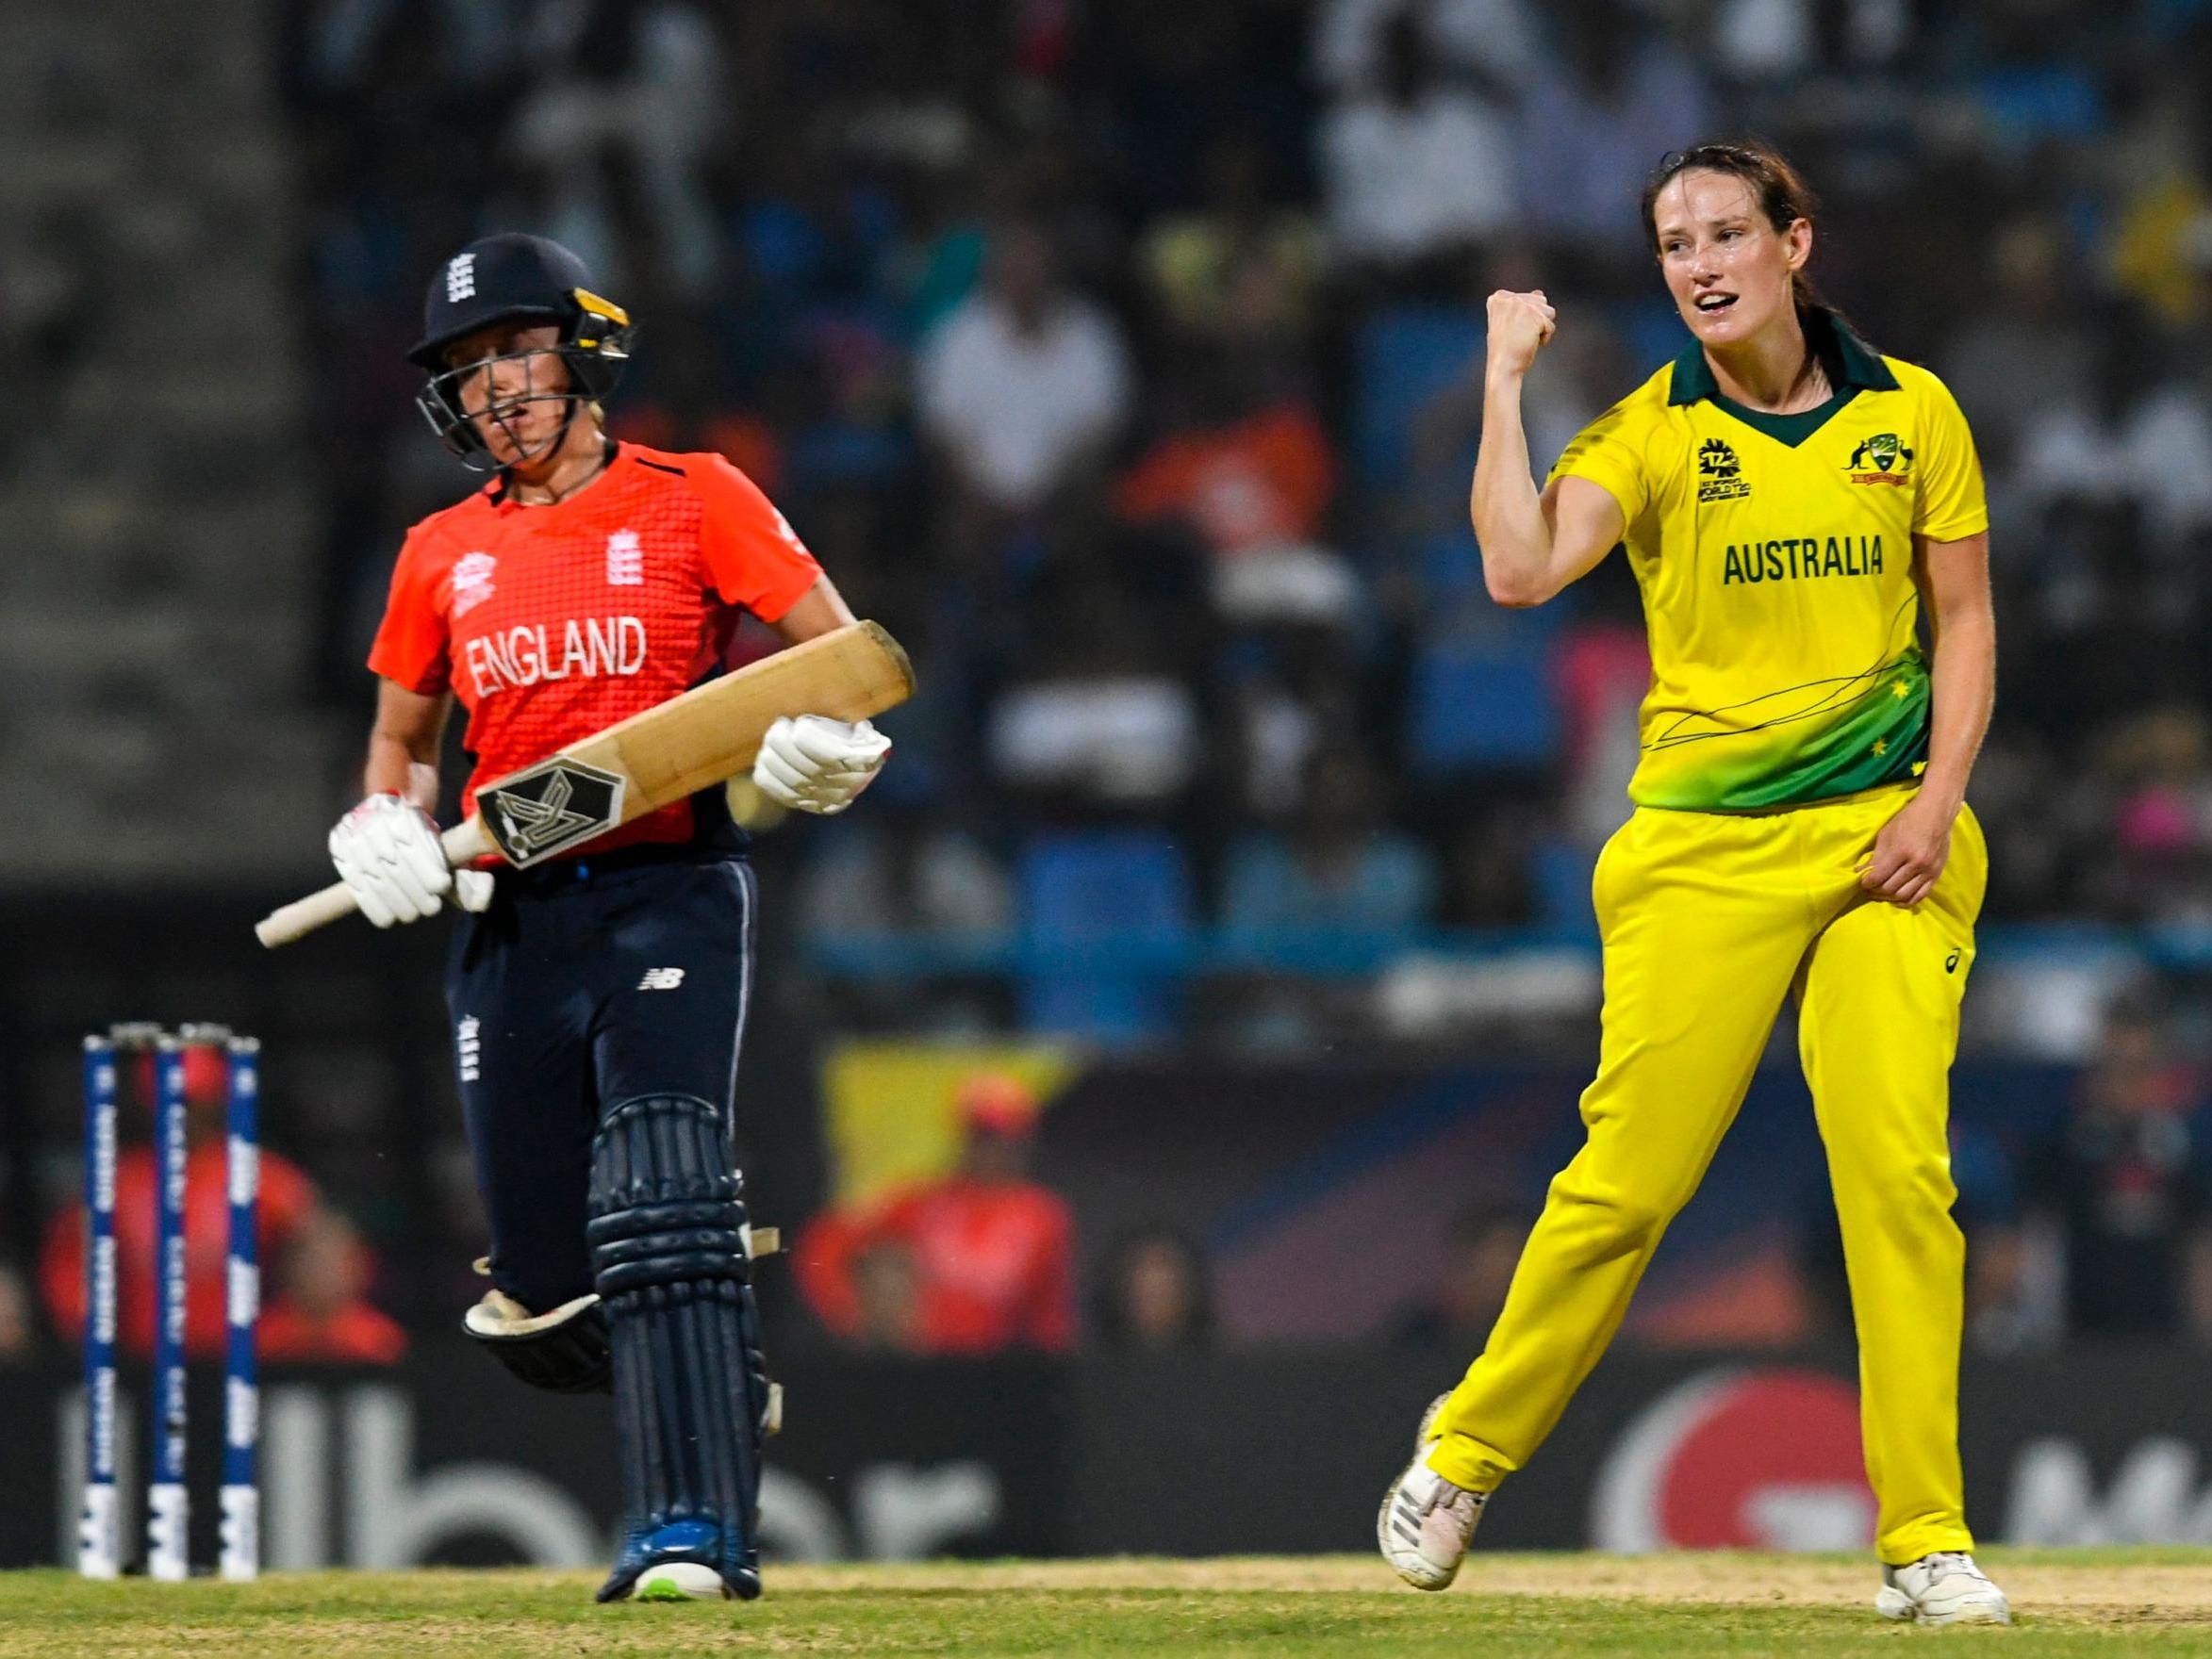 England lost to Australia in the 2018 T20 World Cup final